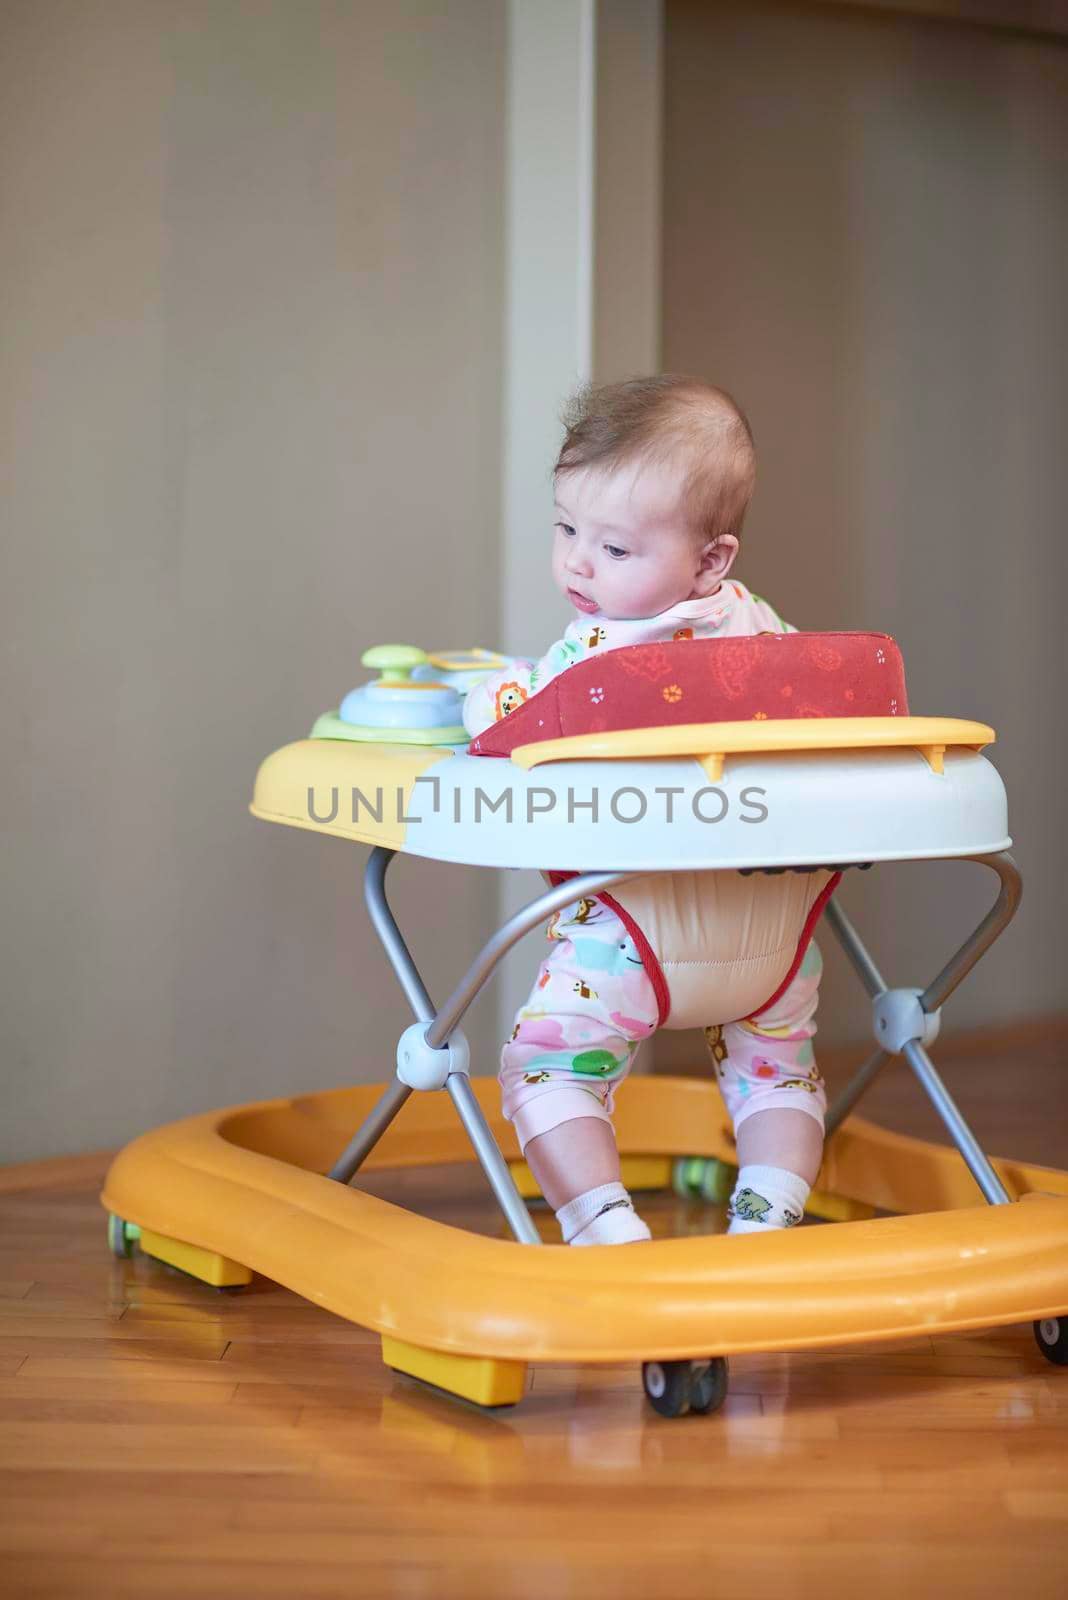 cute little baby learning to walk in walker at home